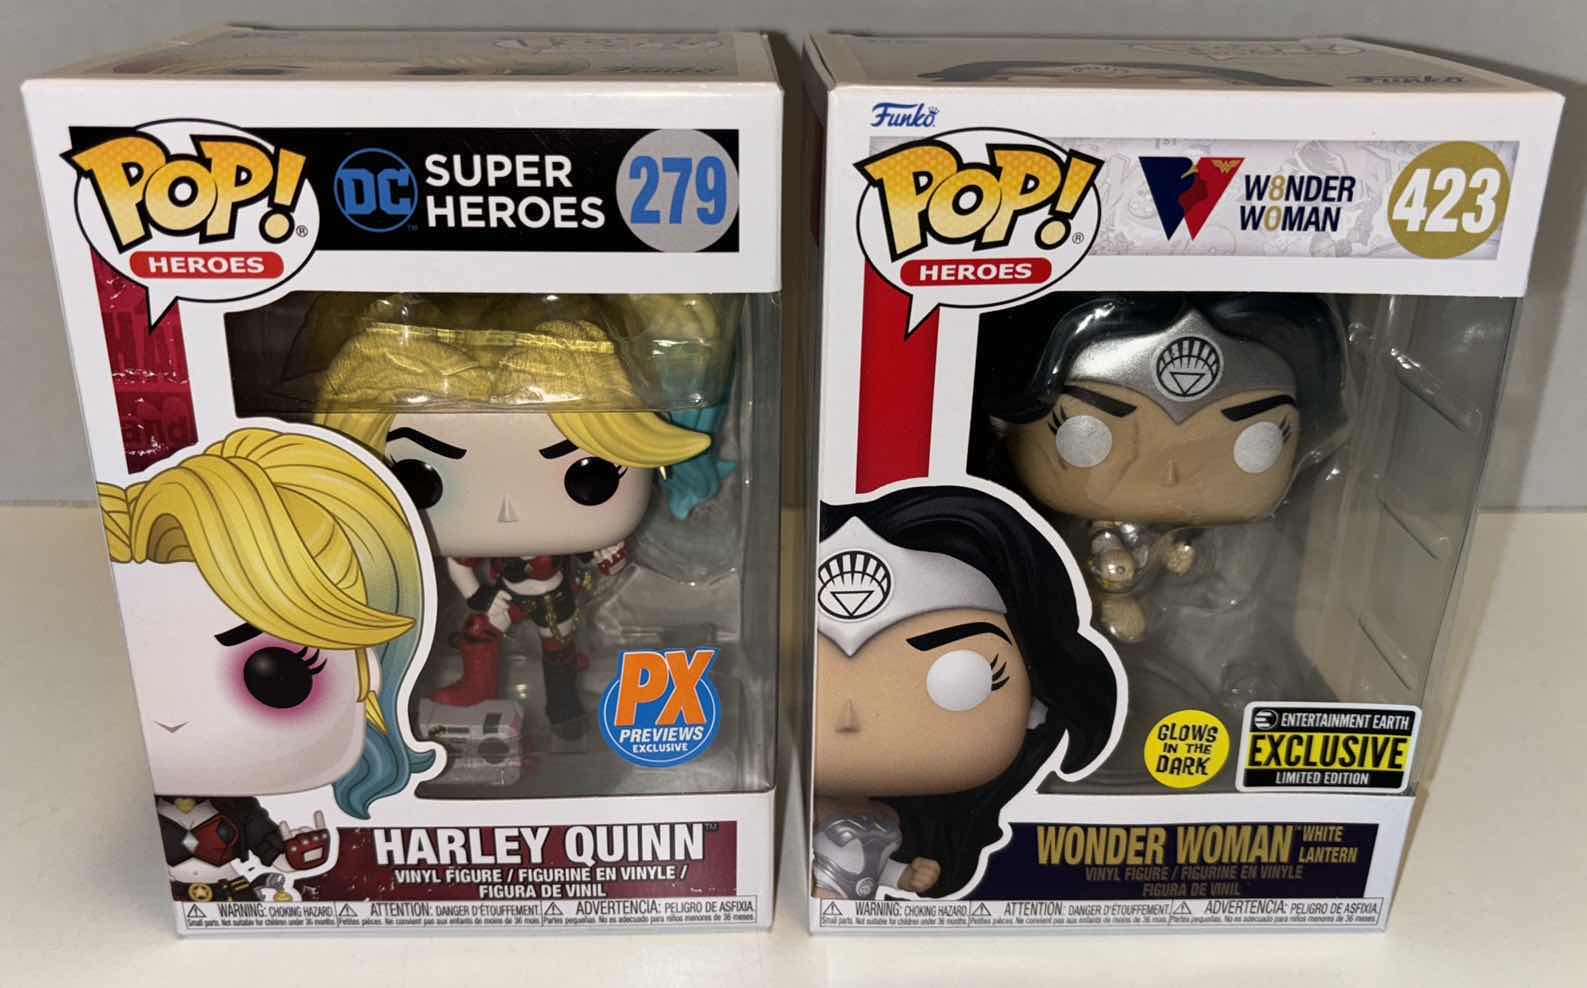 Photo 2 of NEW FUNKO POP! DC HEROES VINYL FIGURE 6-PACK BUNDLE, #279 HARLEY QUINN PX PREVIEWS EXCLUSIVE (3) & #423 80TH ANNIVERSARY WONDER WOMAN WHITE LANTERN ENTERTAINMENT EARTH EXCLUSIVE GLOW IN THE DARK (3)